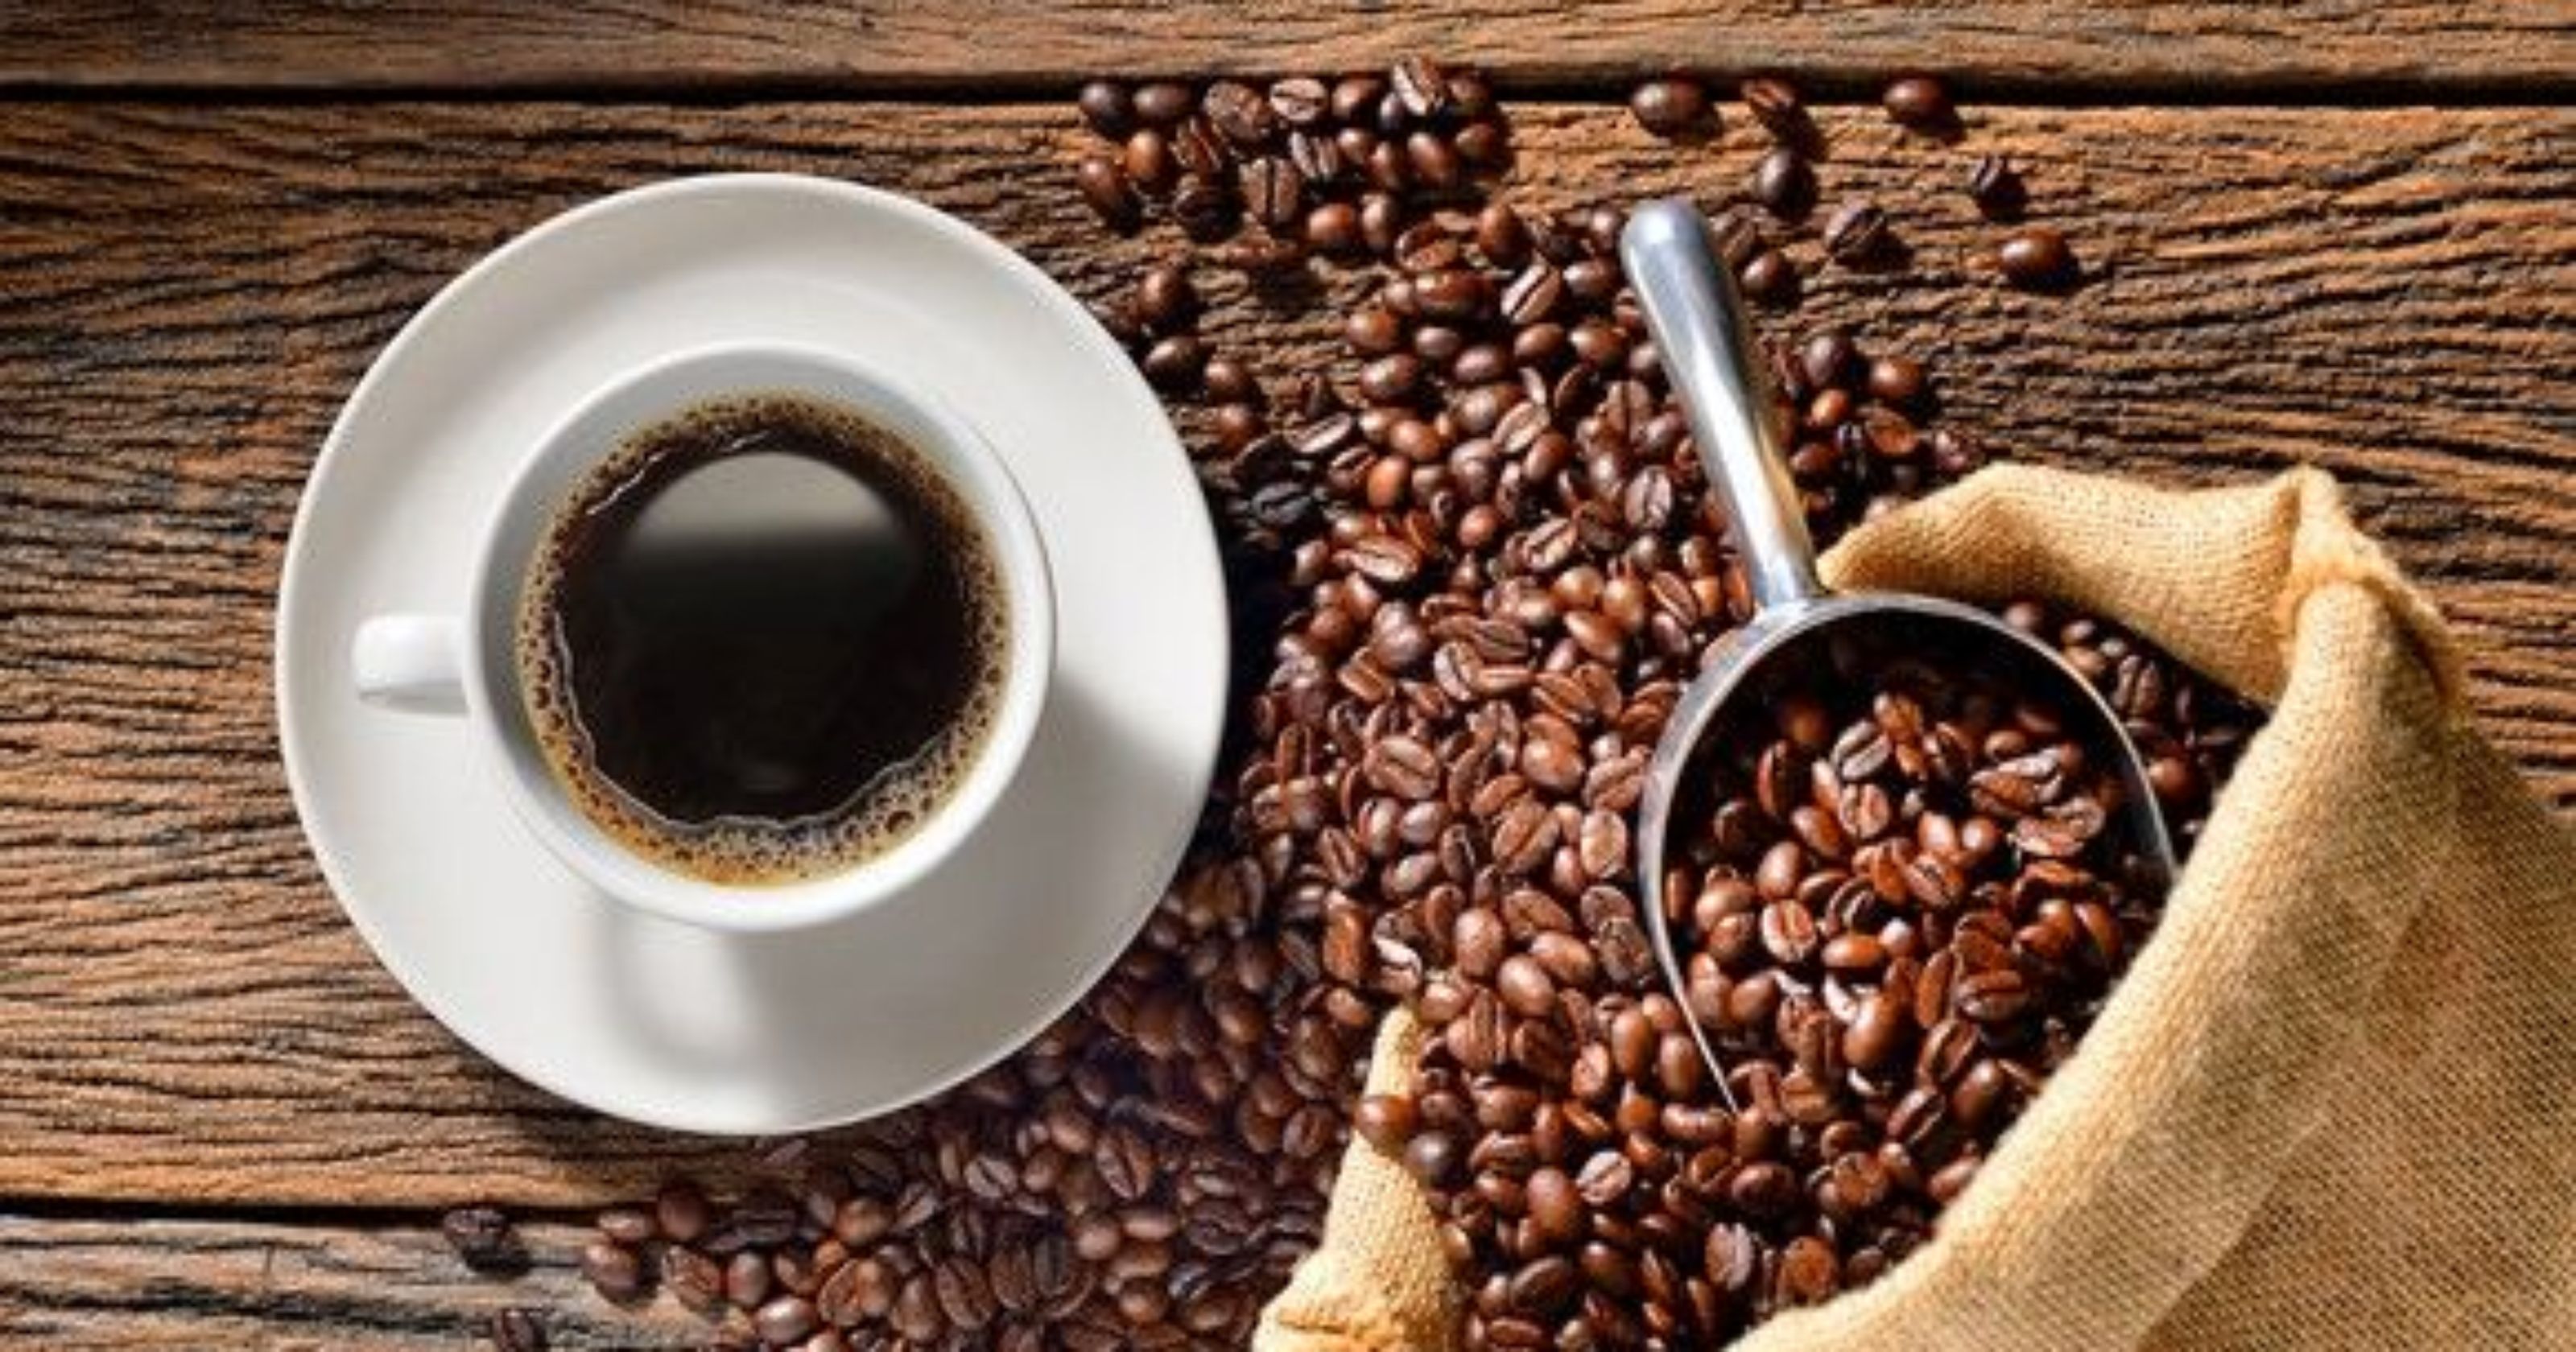 Coffee linked to reduced risk of heart disease, stroke